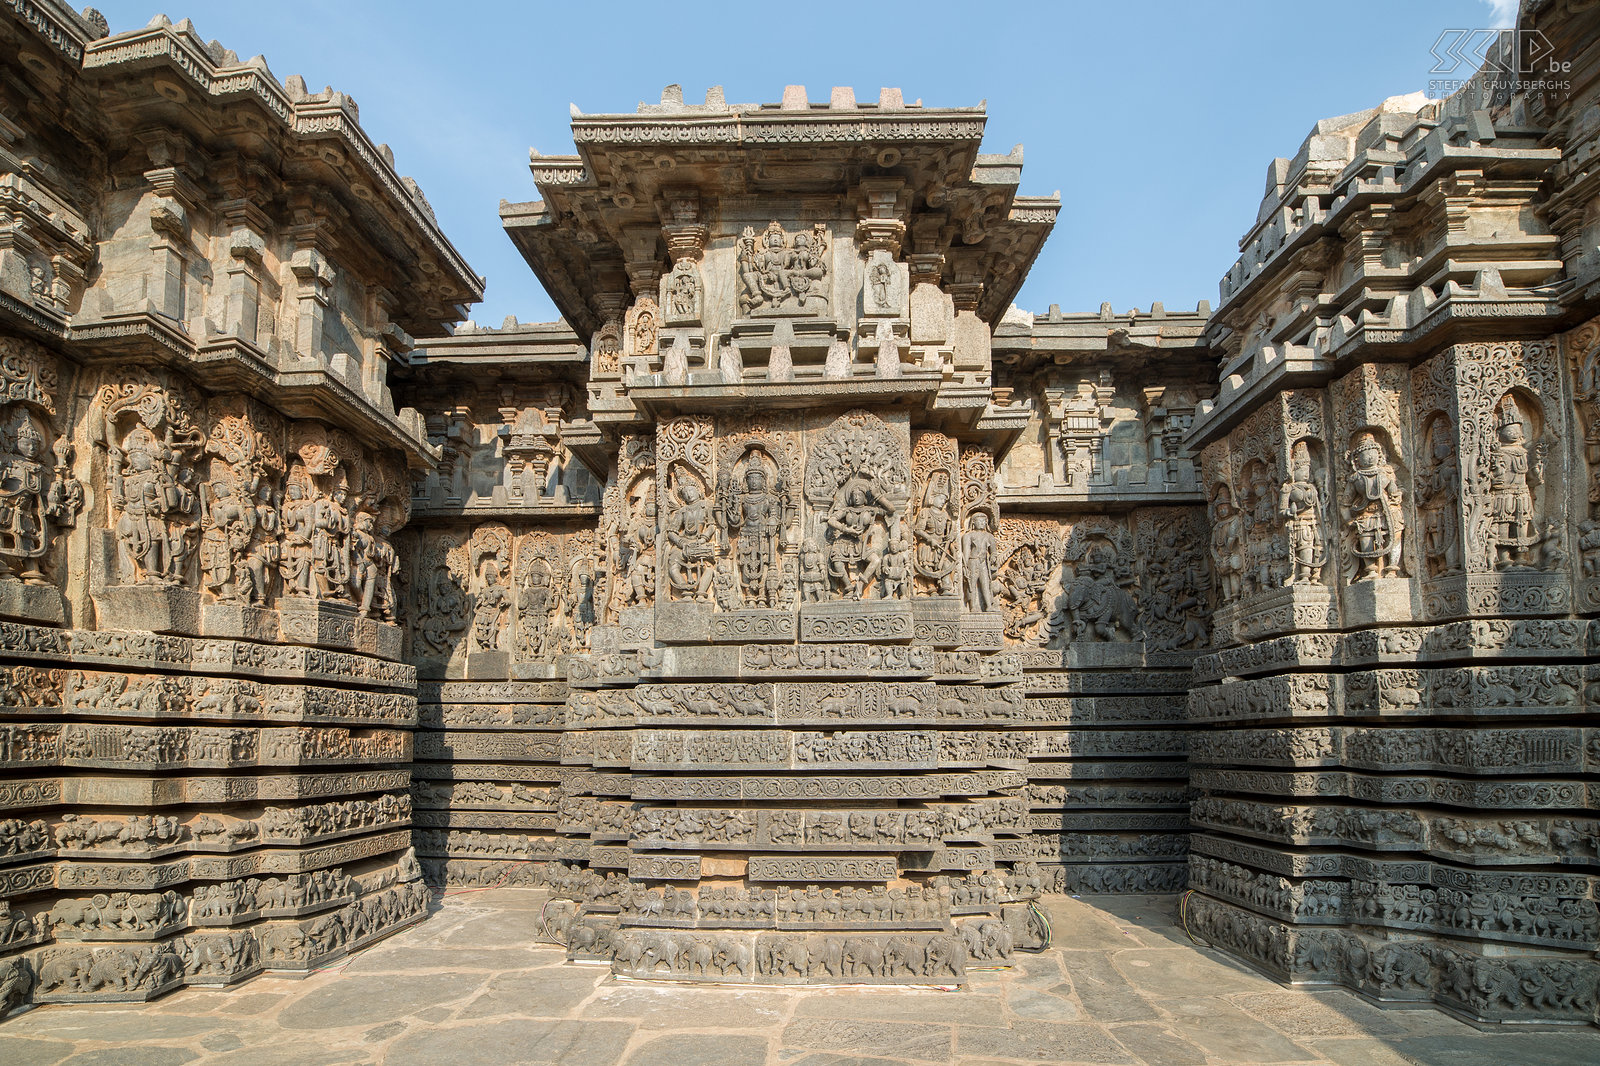 Halebidu The walls of the Hoysala temple in Halebidu are covered with an endless variety of depictions from Hindu mythology, animals and dancing figures. Halebidu was the capital of the Hoysala kingdom in the 12th and 13th century. Stefan Cruysberghs